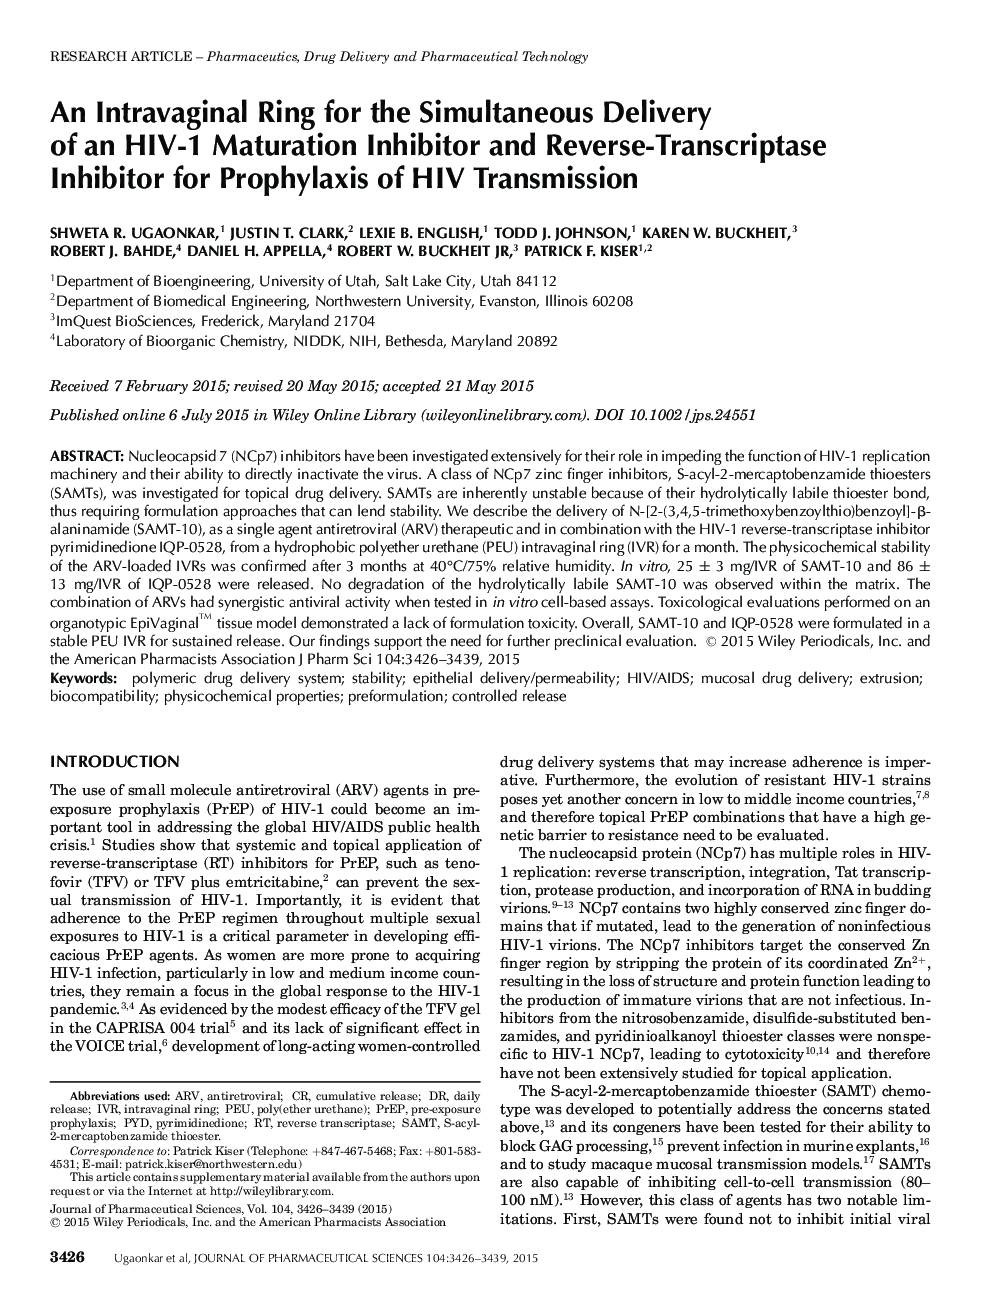 An Intravaginal Ring for the Simultaneous Delivery of an HIV-1 Maturation Inhibitor and Reverse-Transcriptase Inhibitor for Prophylaxis of HIV Transmission